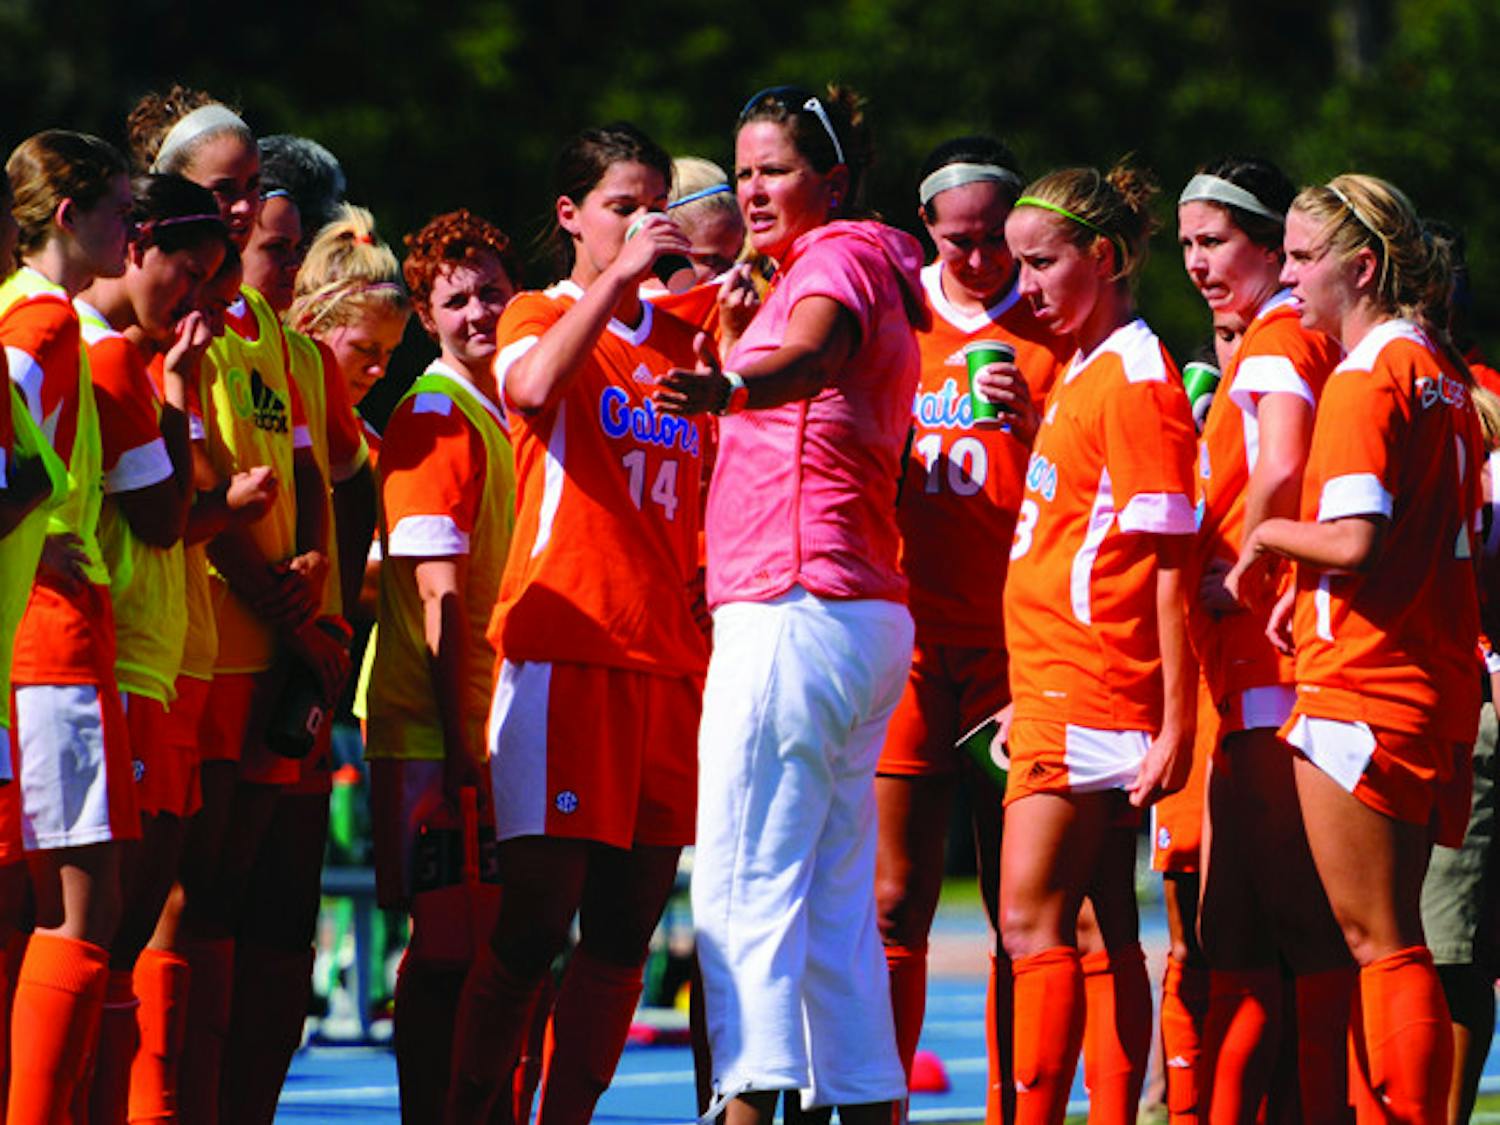 Florida coach Becky Burleigh (center) said the Gators didn’t panic after allowing a goal in the first minute against Mississippi State on Sunday, but No. 11 UF lost 1-0 in Starkville, Miss.